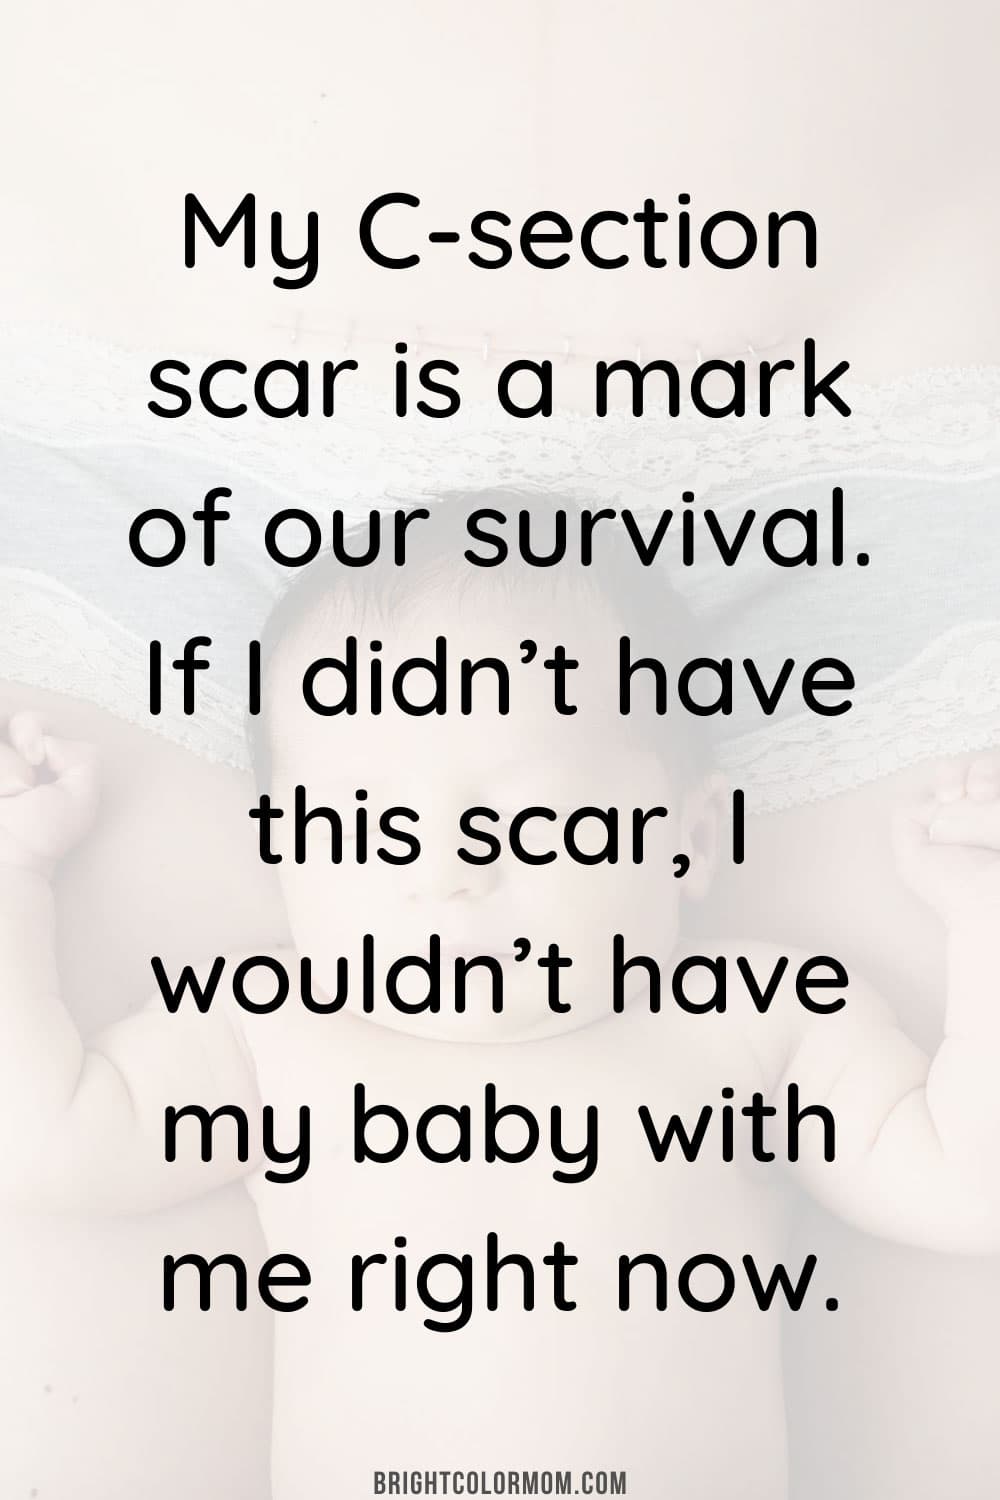 My C-section scar is a mark of our survival. If I didn’t have this scar, I wouldn’t have my baby with me right now.